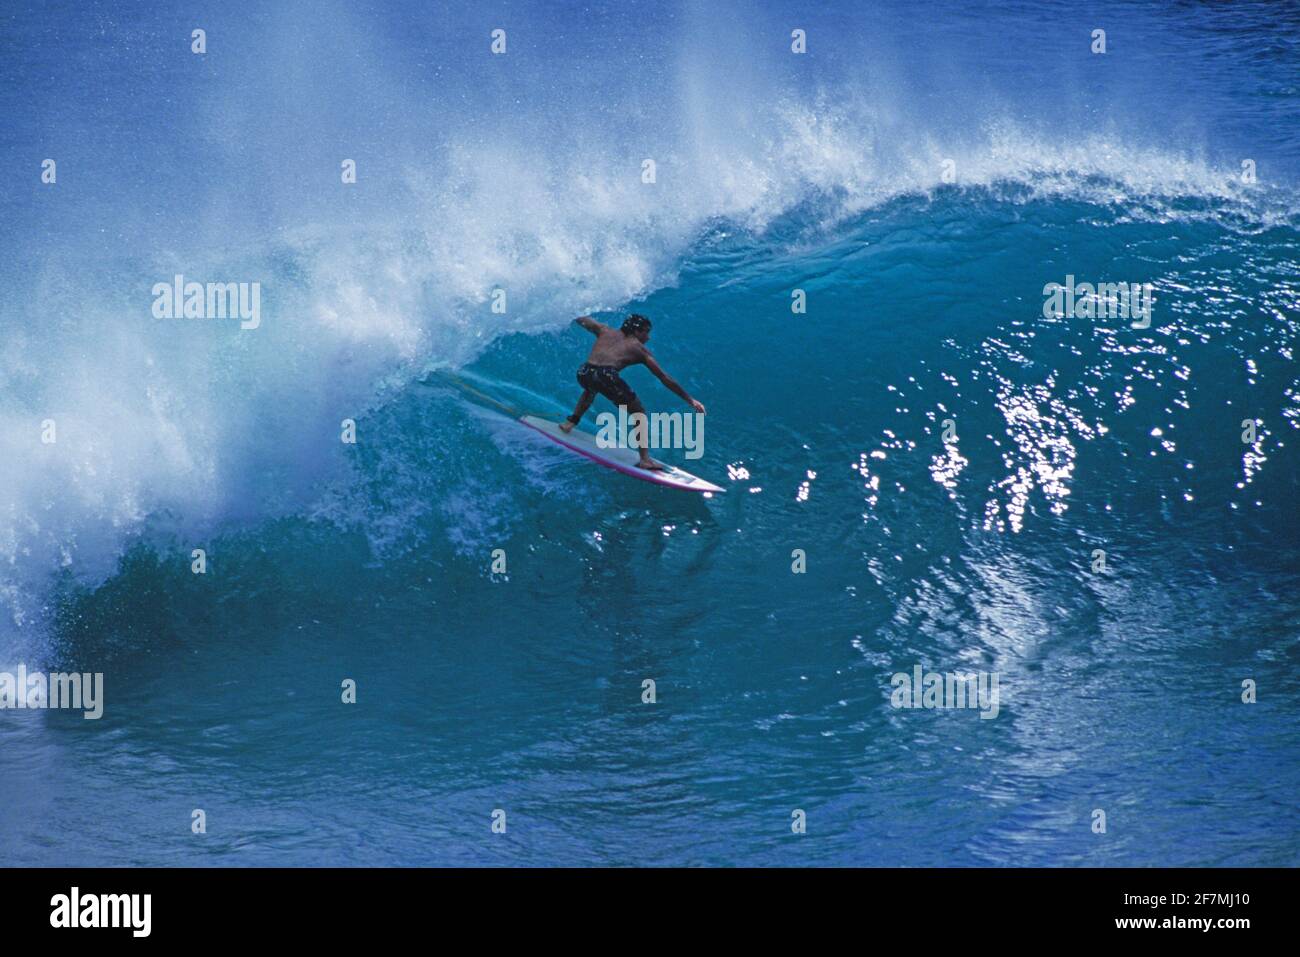 Surfing. Surfer in barrel wave. Stock Photo